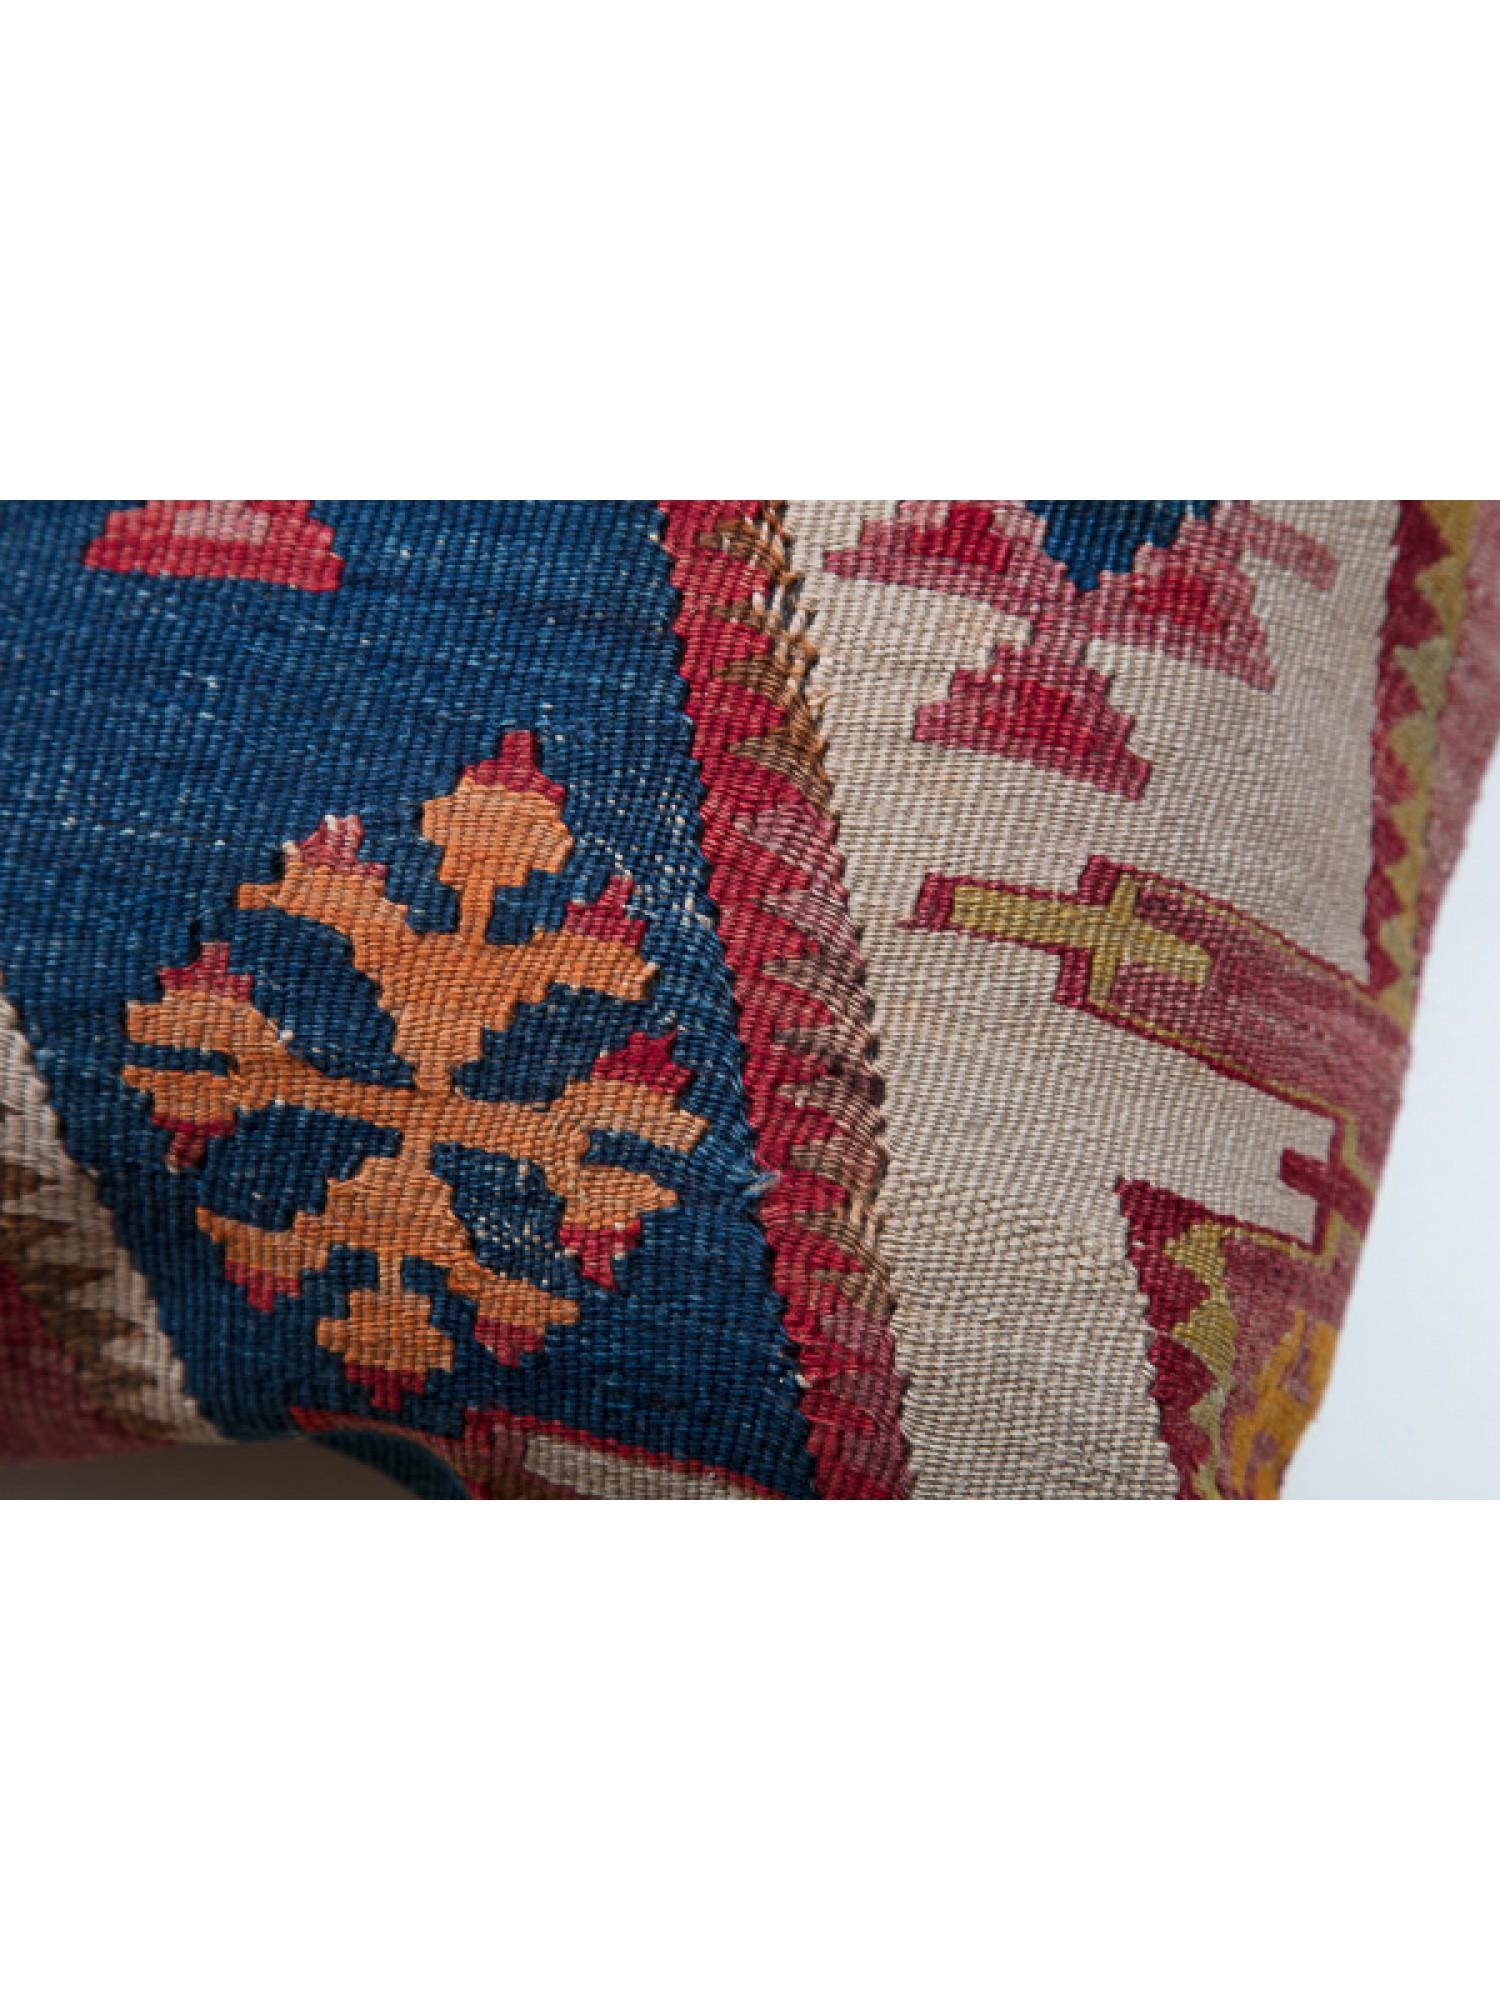 Contemporary Antique & Old Kilim Cushion Cover, Anatolian Yastik Turkish Modern Pillow KC3476 For Sale